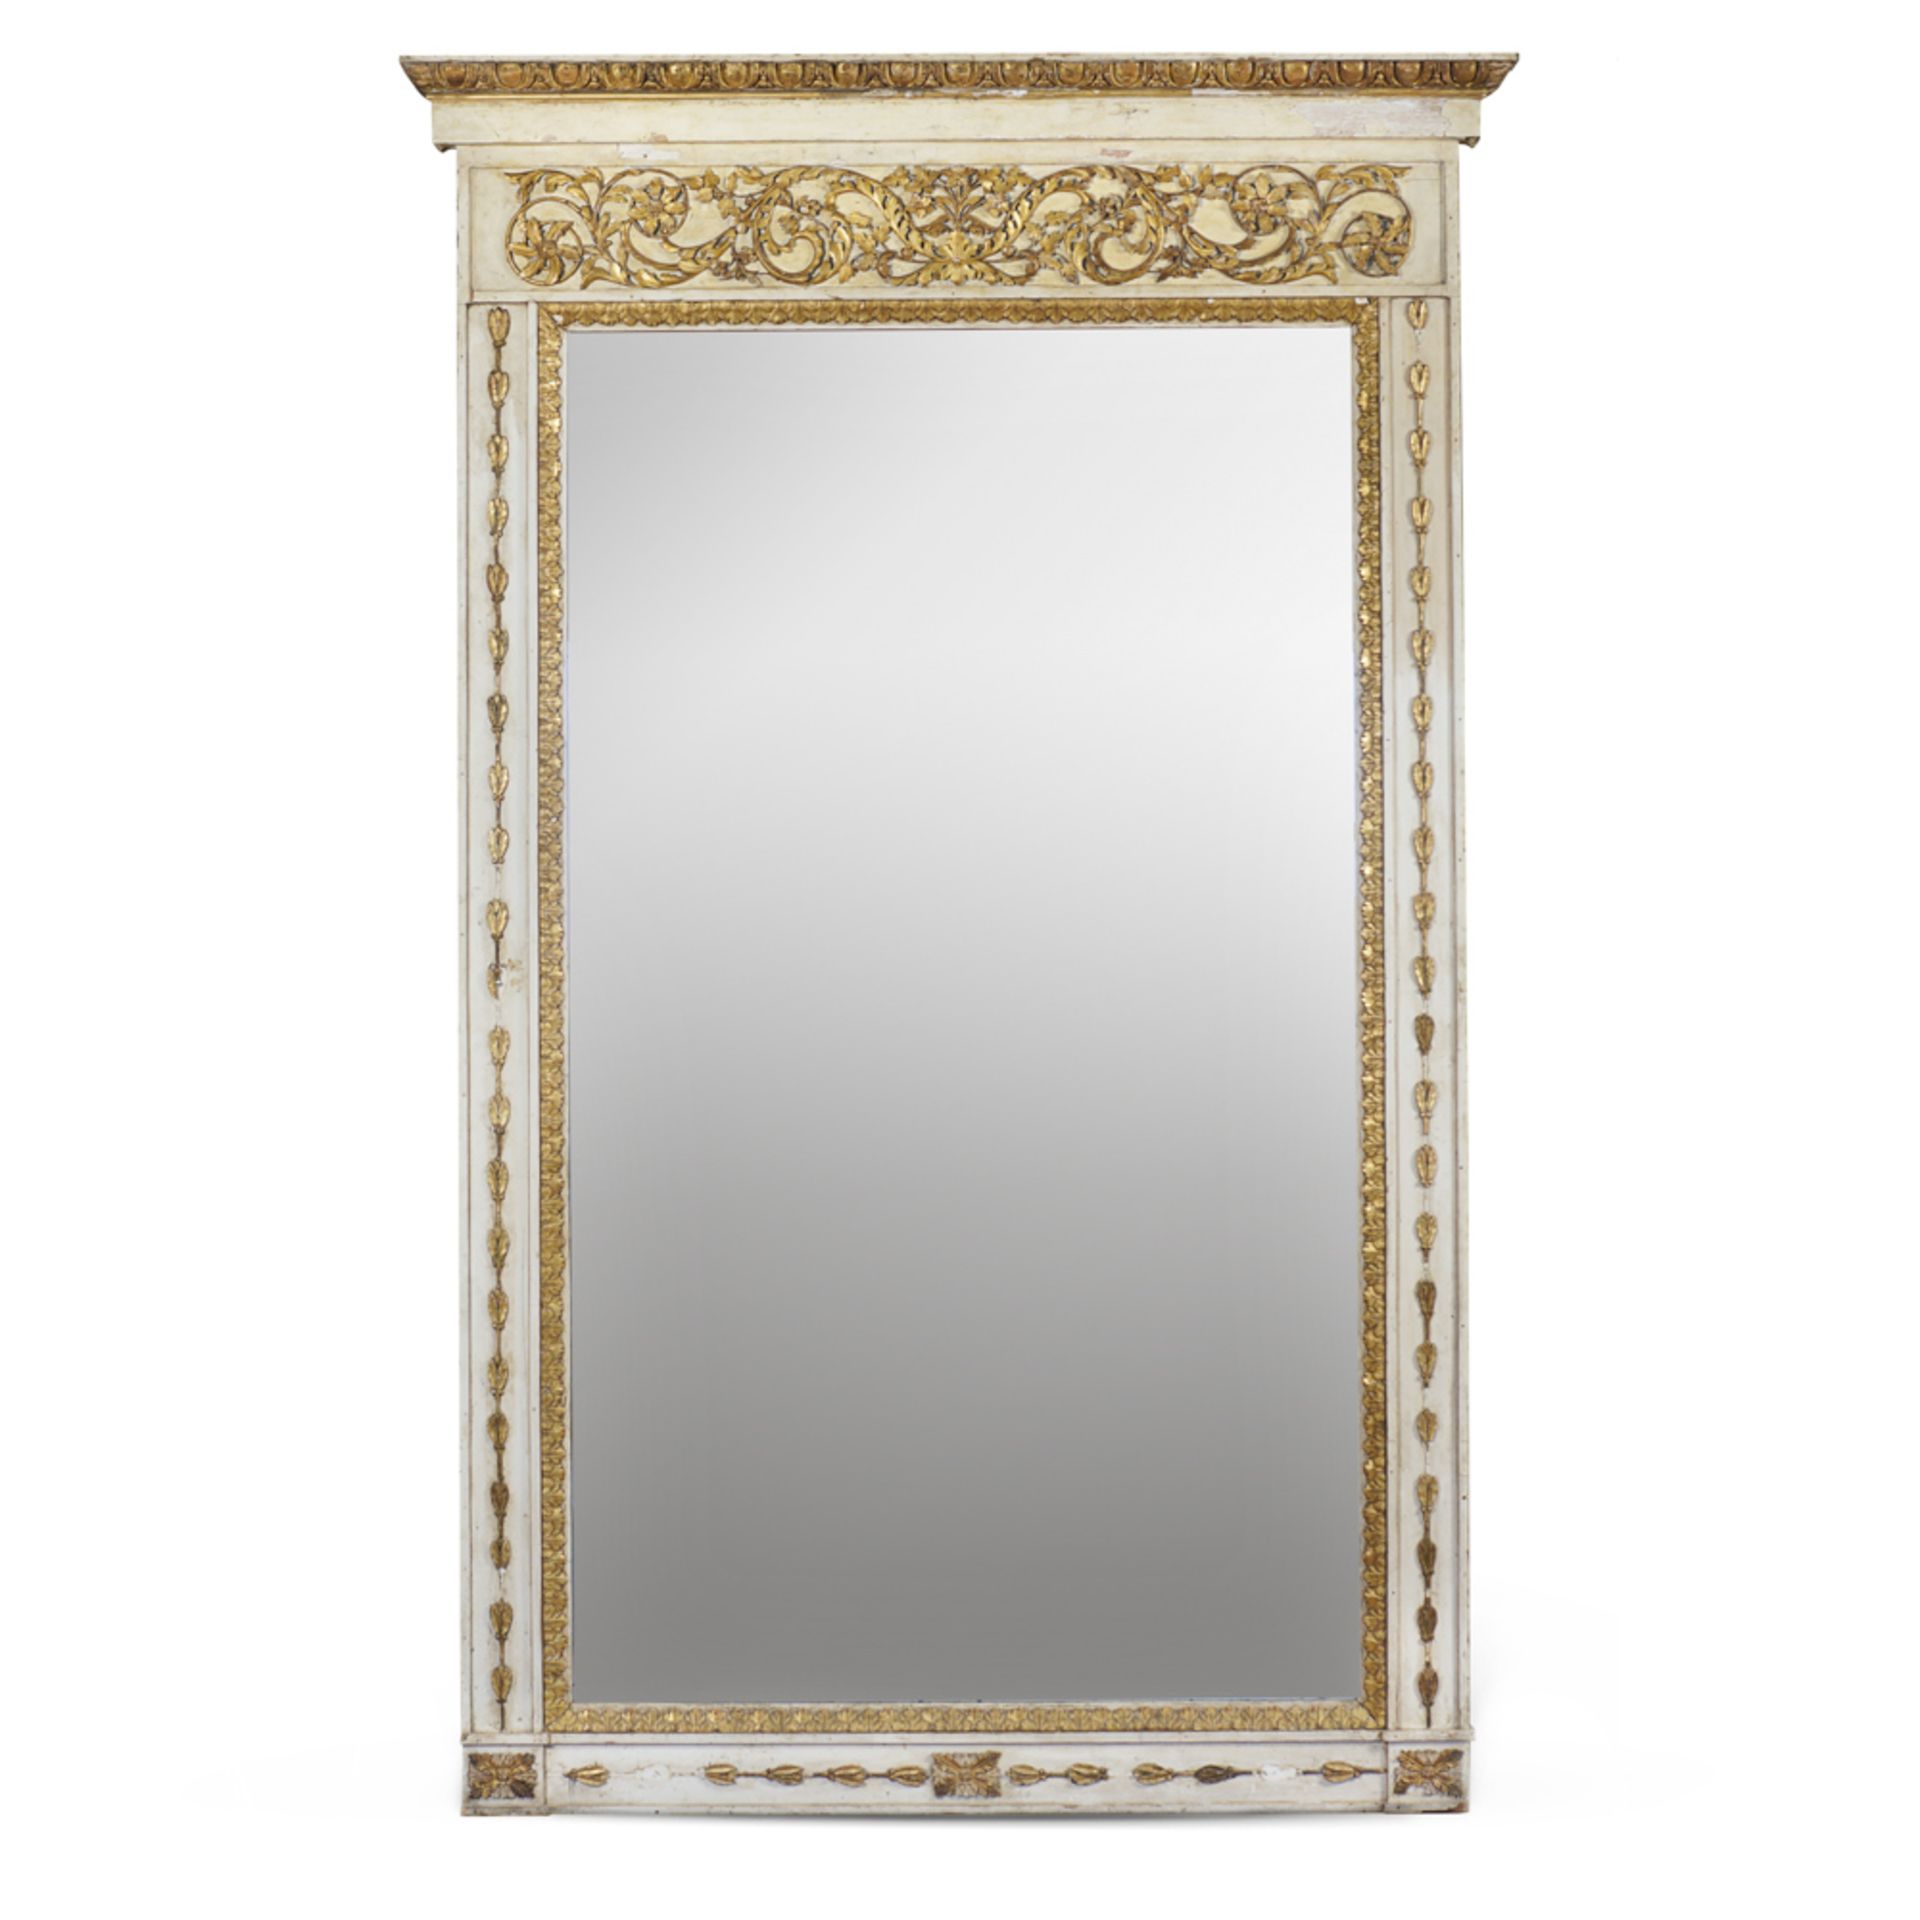 Large lacquered and giltwood mirror Italy, 18th century 256x155 cm.